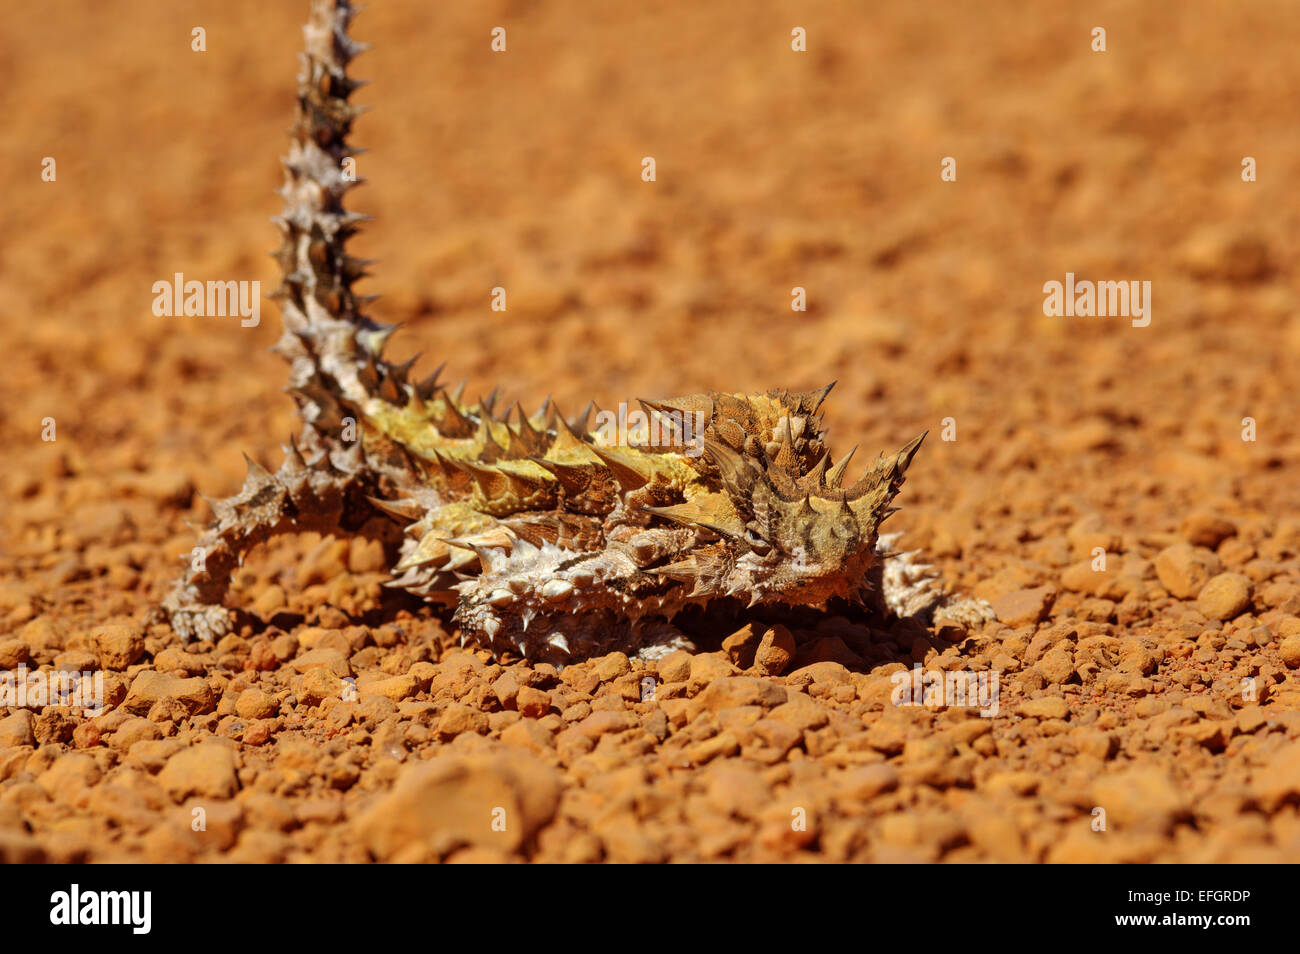 Thorny dragon or thorny devil (Moloch horridus) is an Australian lizard, this one was on an outback road in Western Australia. Stock Photo